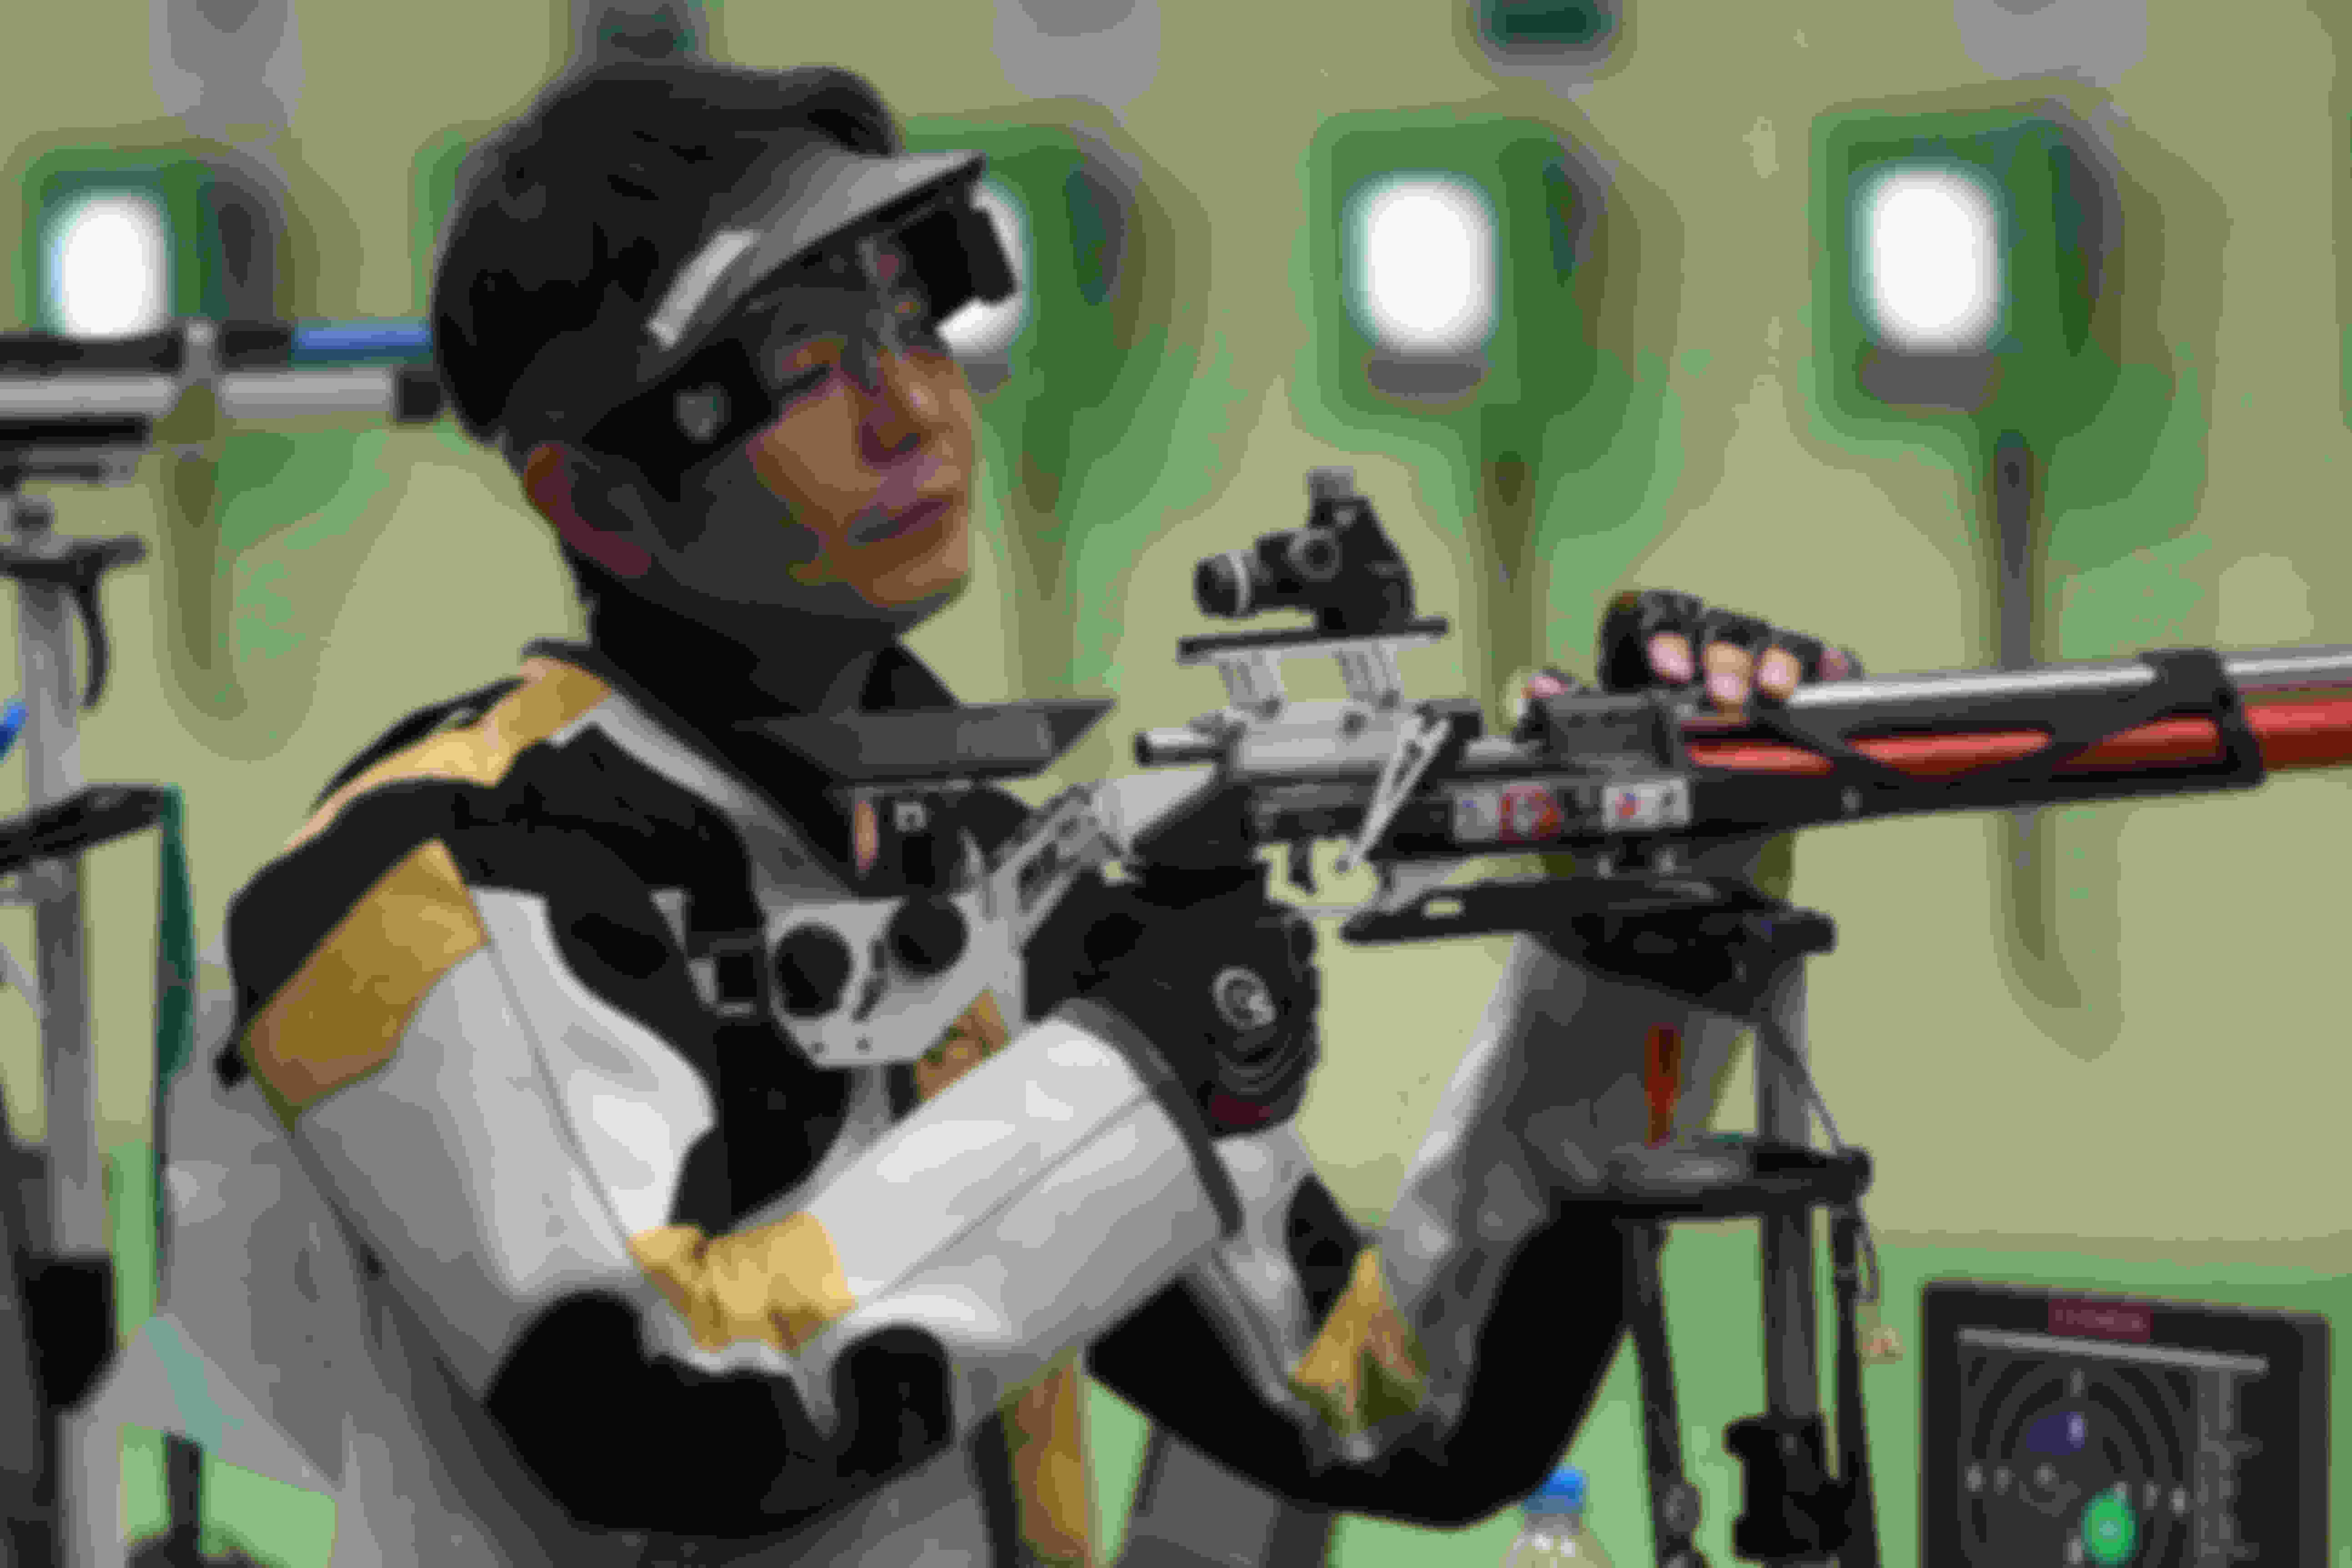 Rifle shooters wear a special jacket and blinders for stability and focus.